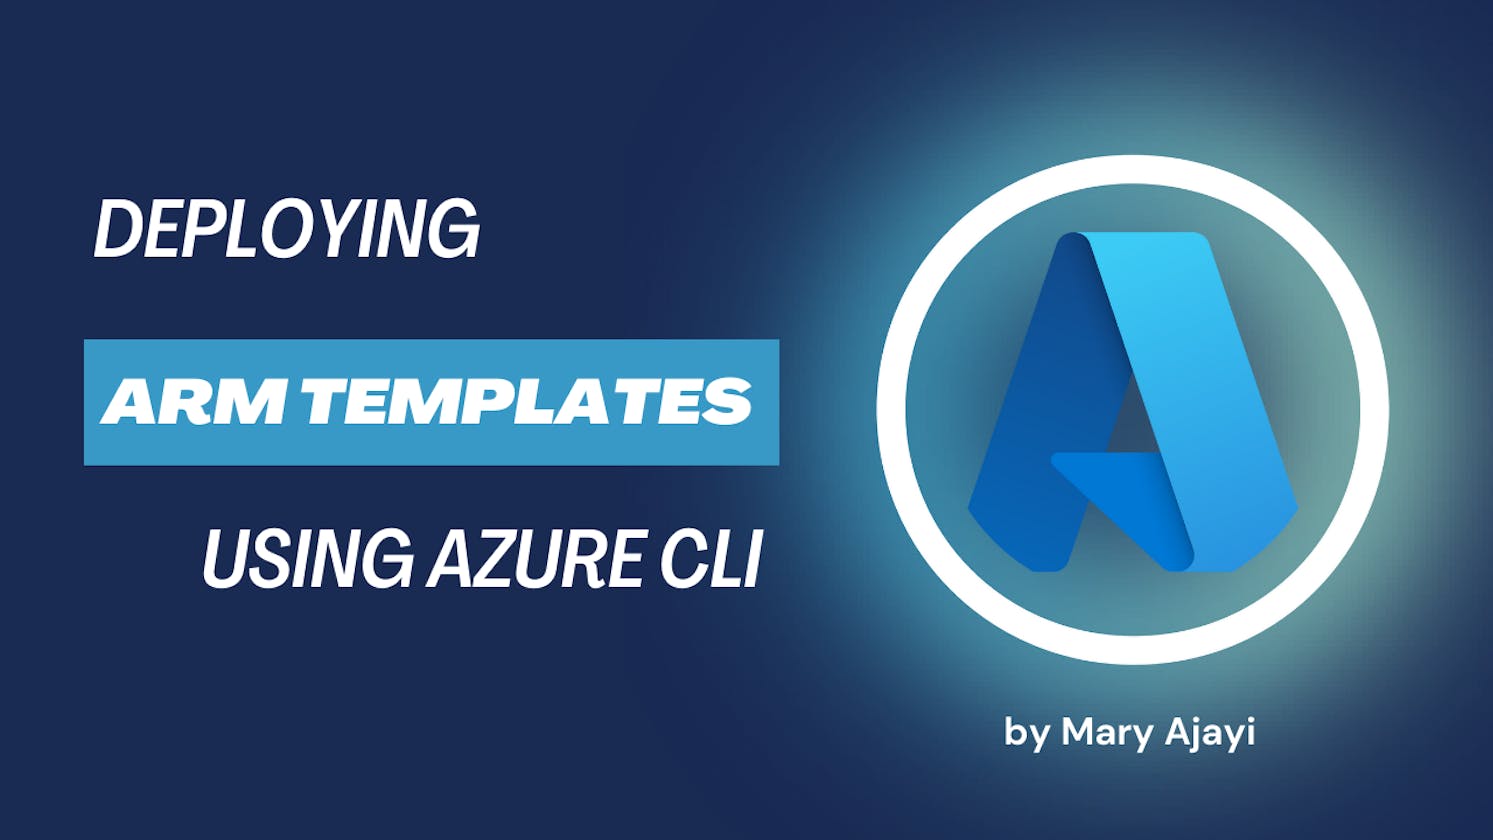 Efficient Virtual Machine Deployment with Azure CLI and ARM Templates: A Step-by-Step Guide